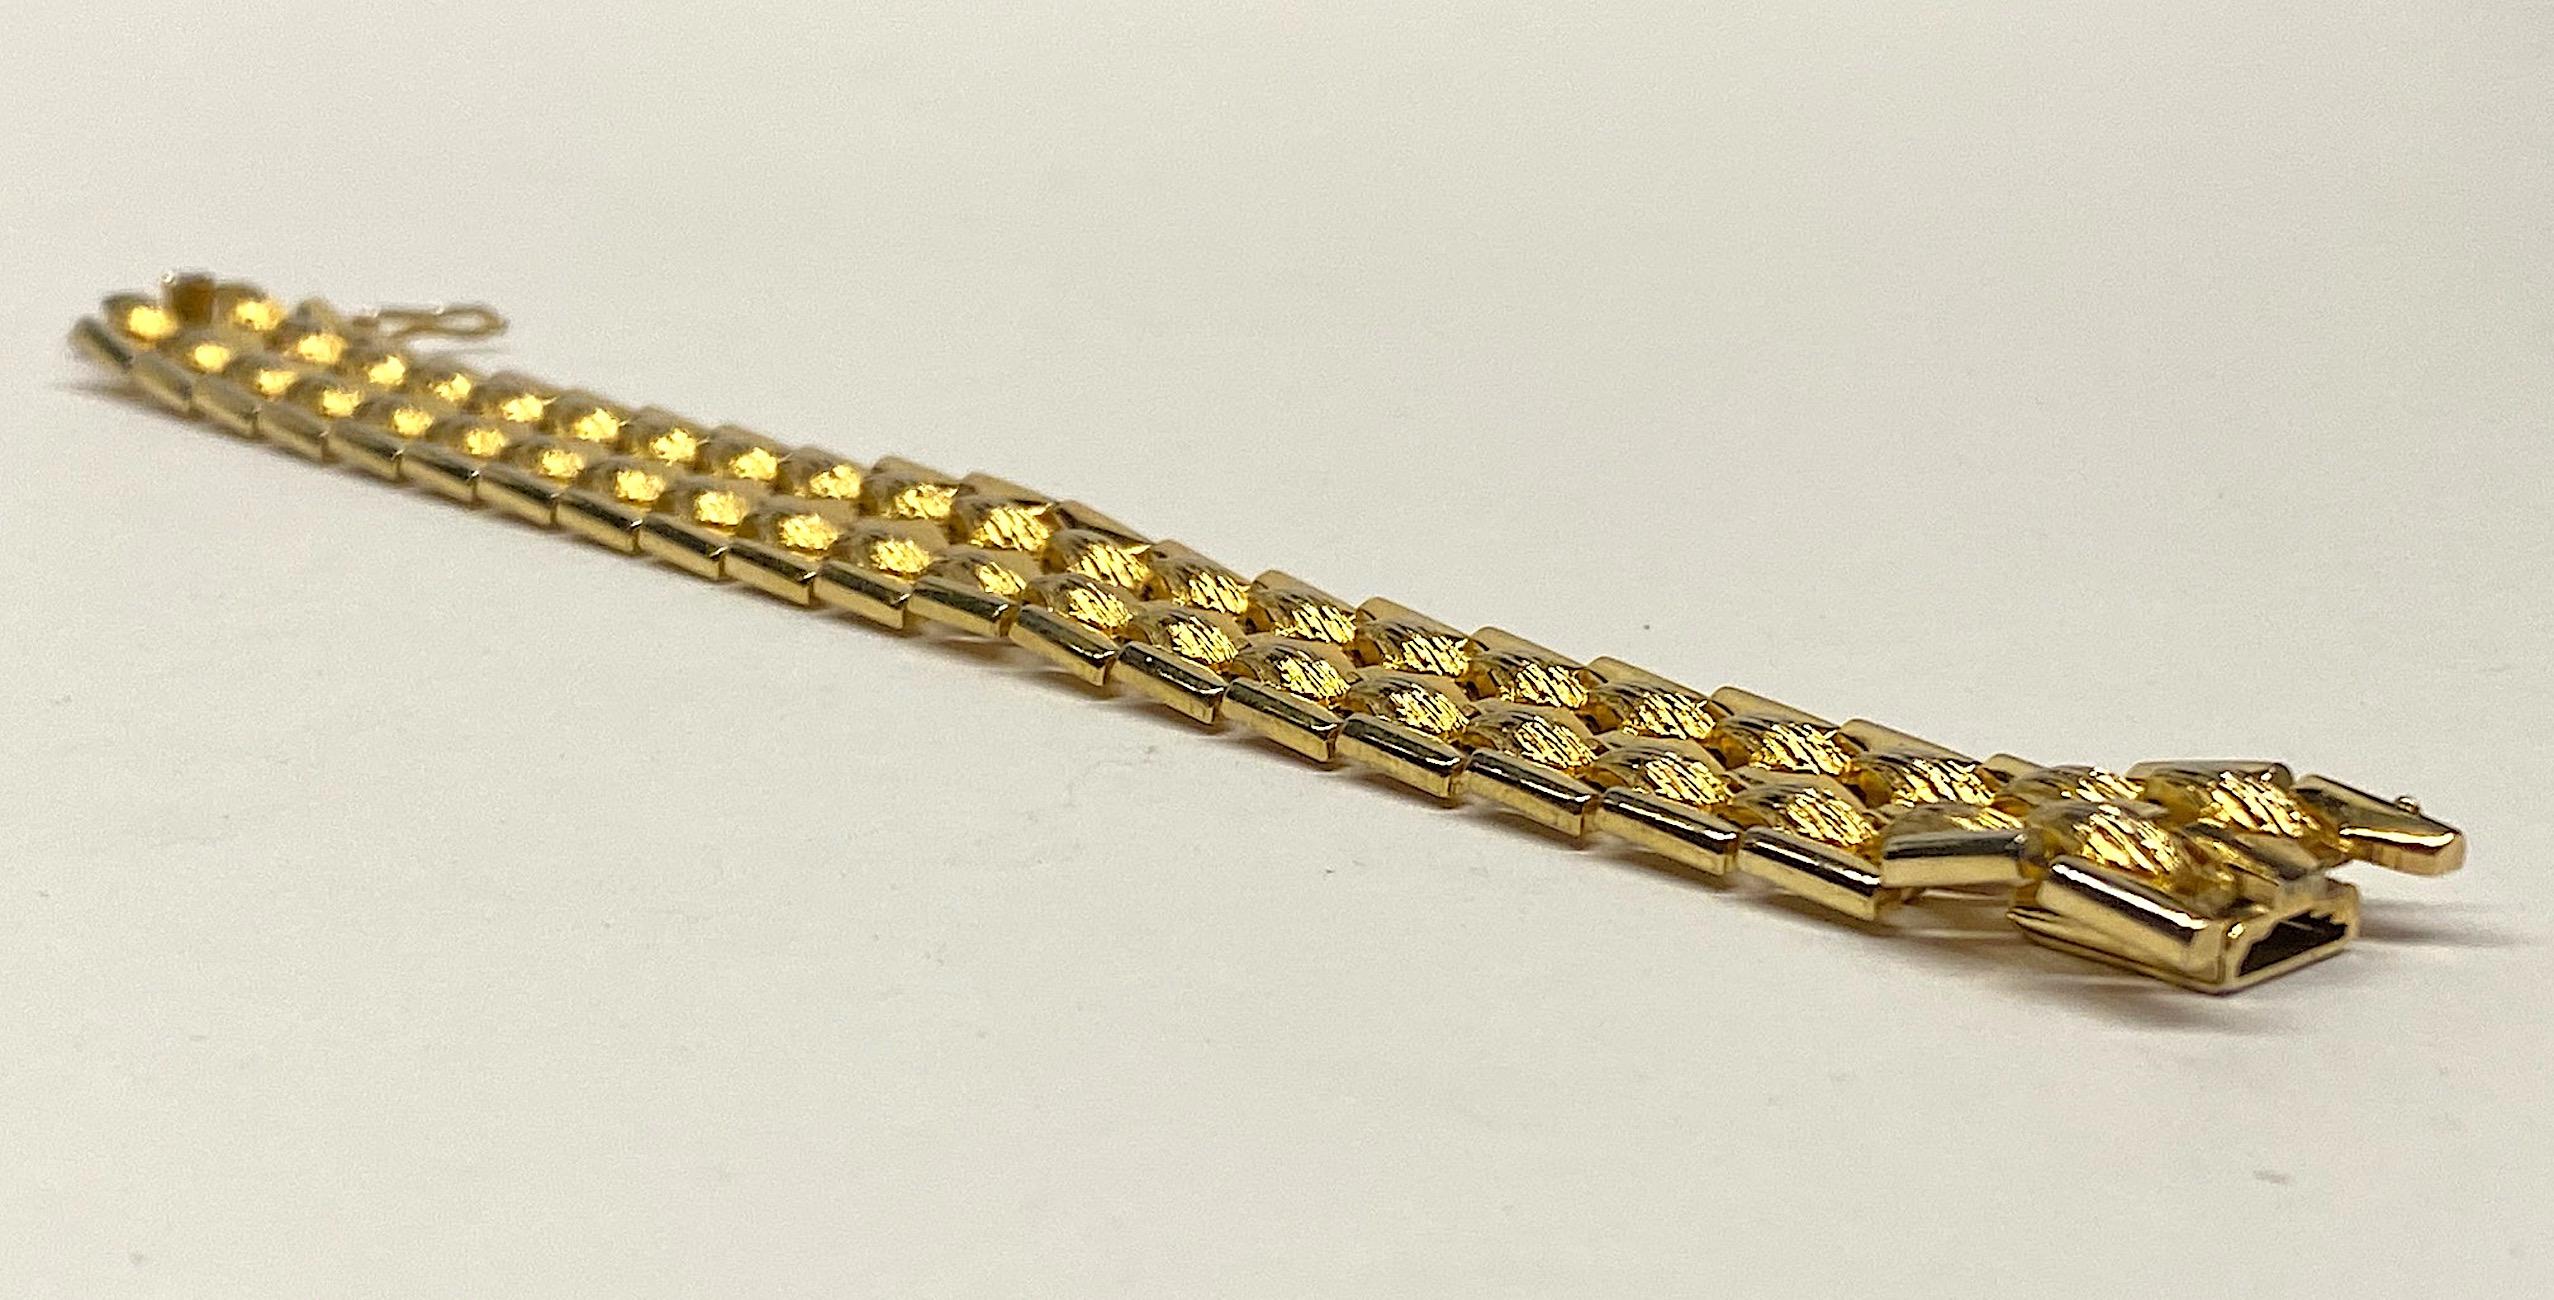 A classic style link bracelet by German manufacturer Grosse' from 1958. The elongated honeycomb design is executed in alternating rows of shiny and textured gold plate. It measures .82 of an inch wide and 7.88 inches long laid flat with a wearable